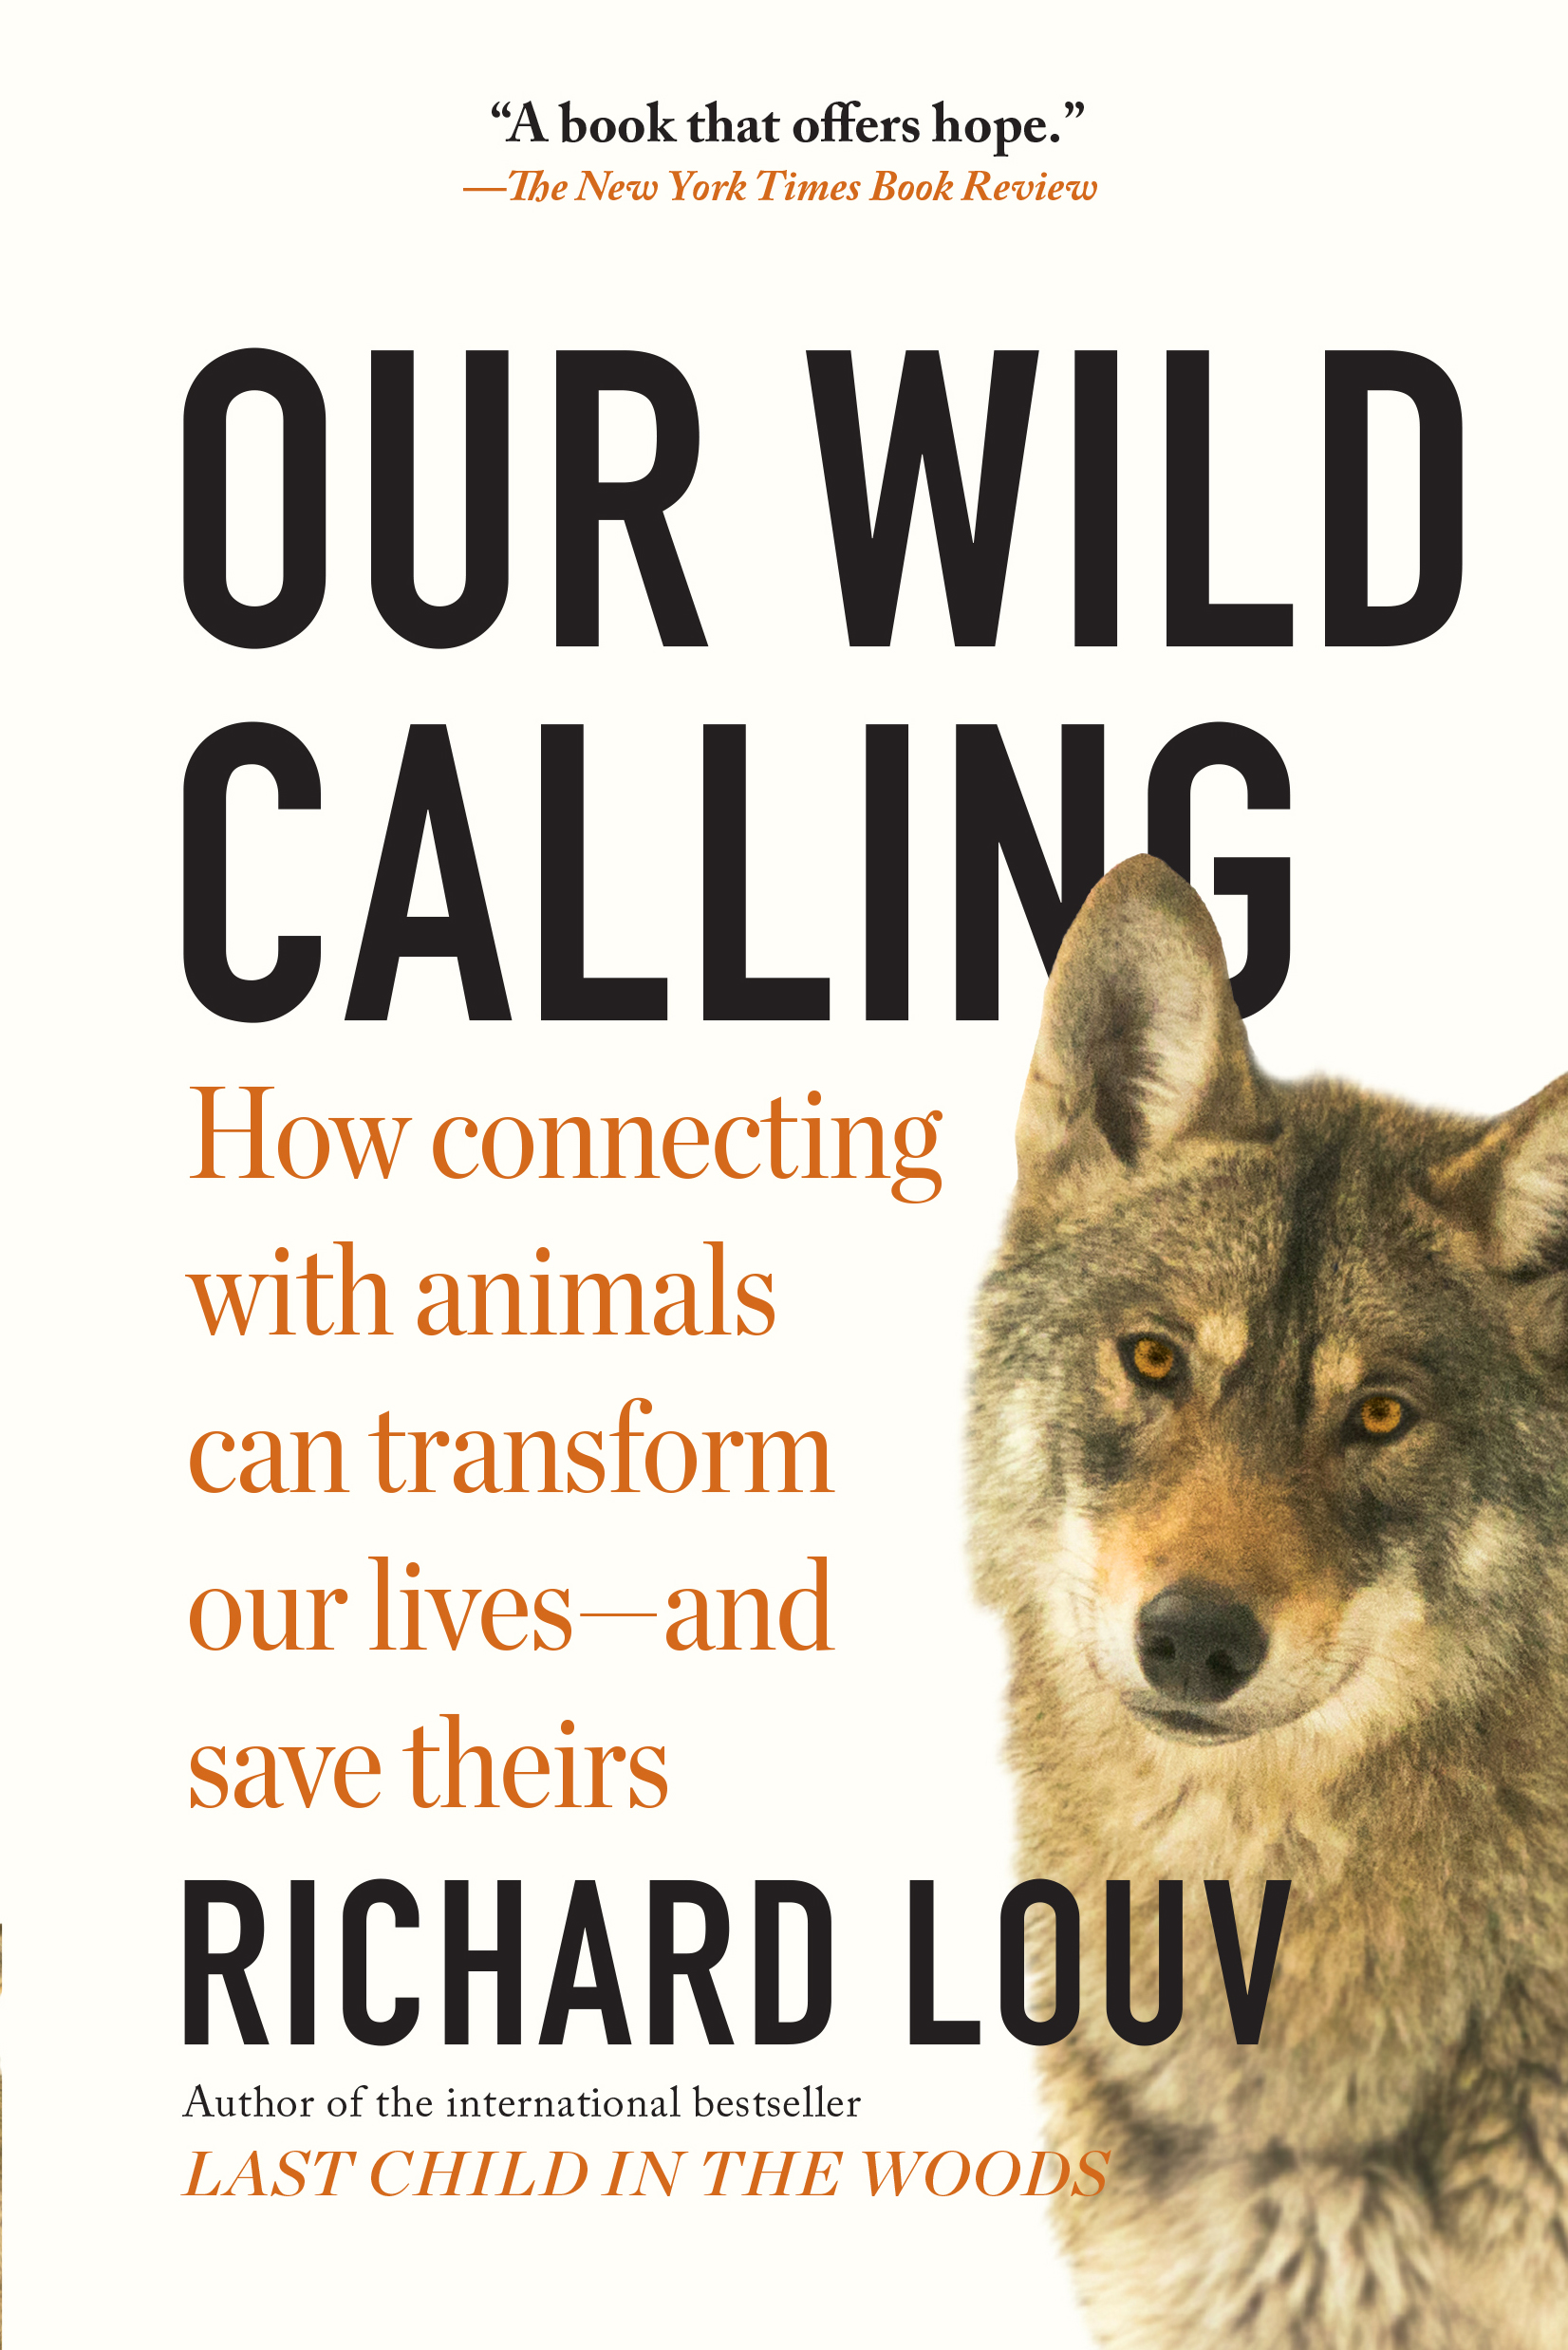 Our　Book　Hachette　Wild　Richard　Louv　Calling　by　Group